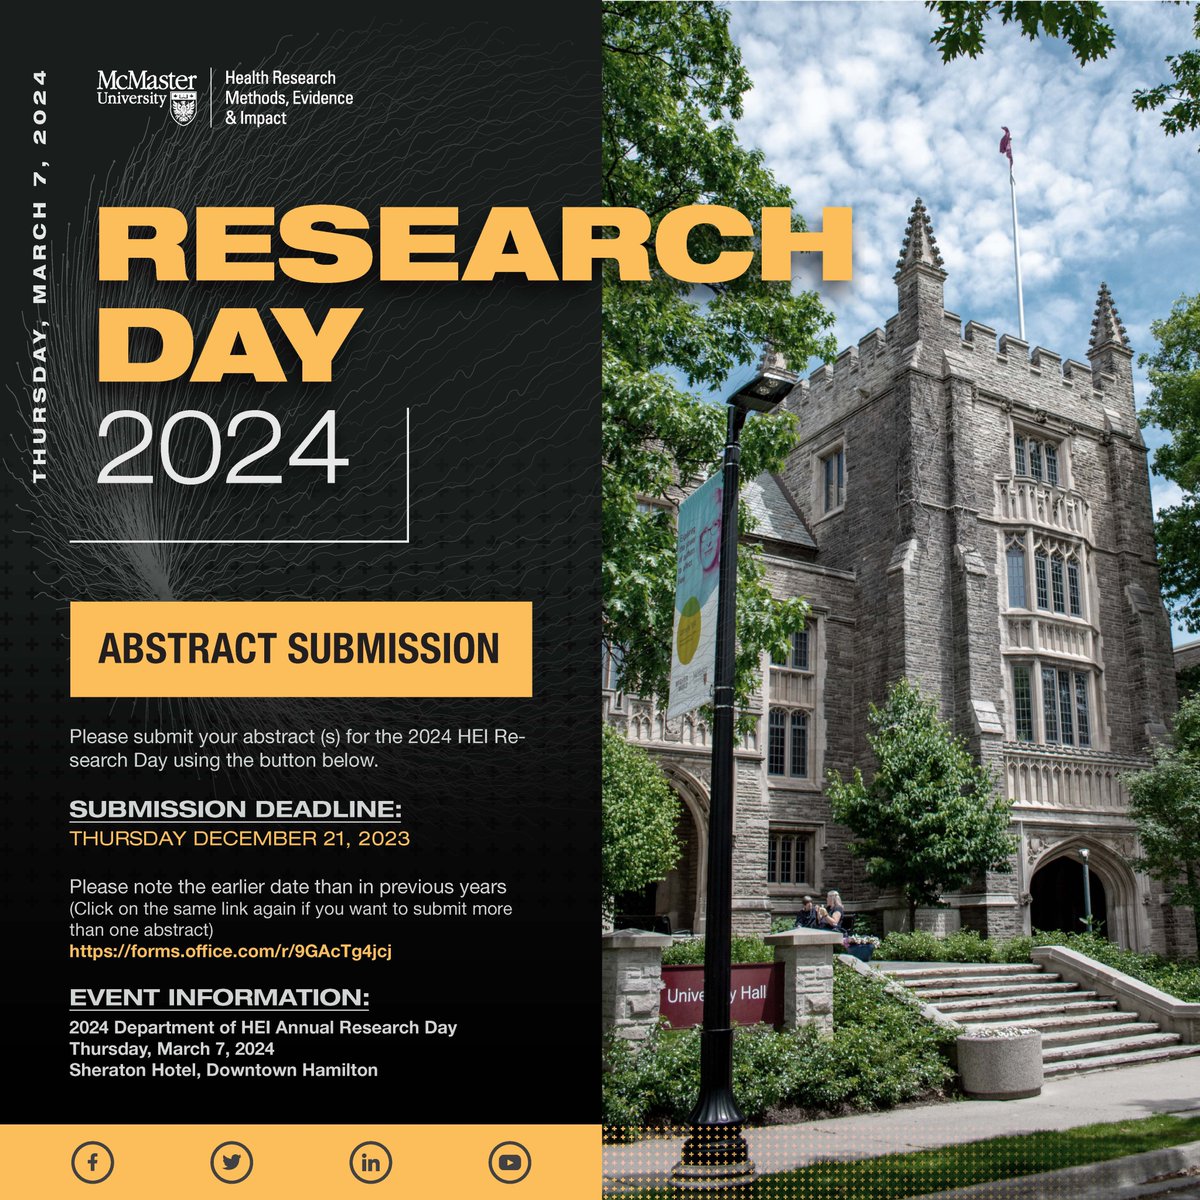 Less than two weeks till our abstract submission deadline! Submit your abstract here: forms.office.com/r/9GAcTg4jcj by December 21st. @HRMStudentsA @GDCE_McMaster @McMasterU @MPHMcMaster @MacHPPhD